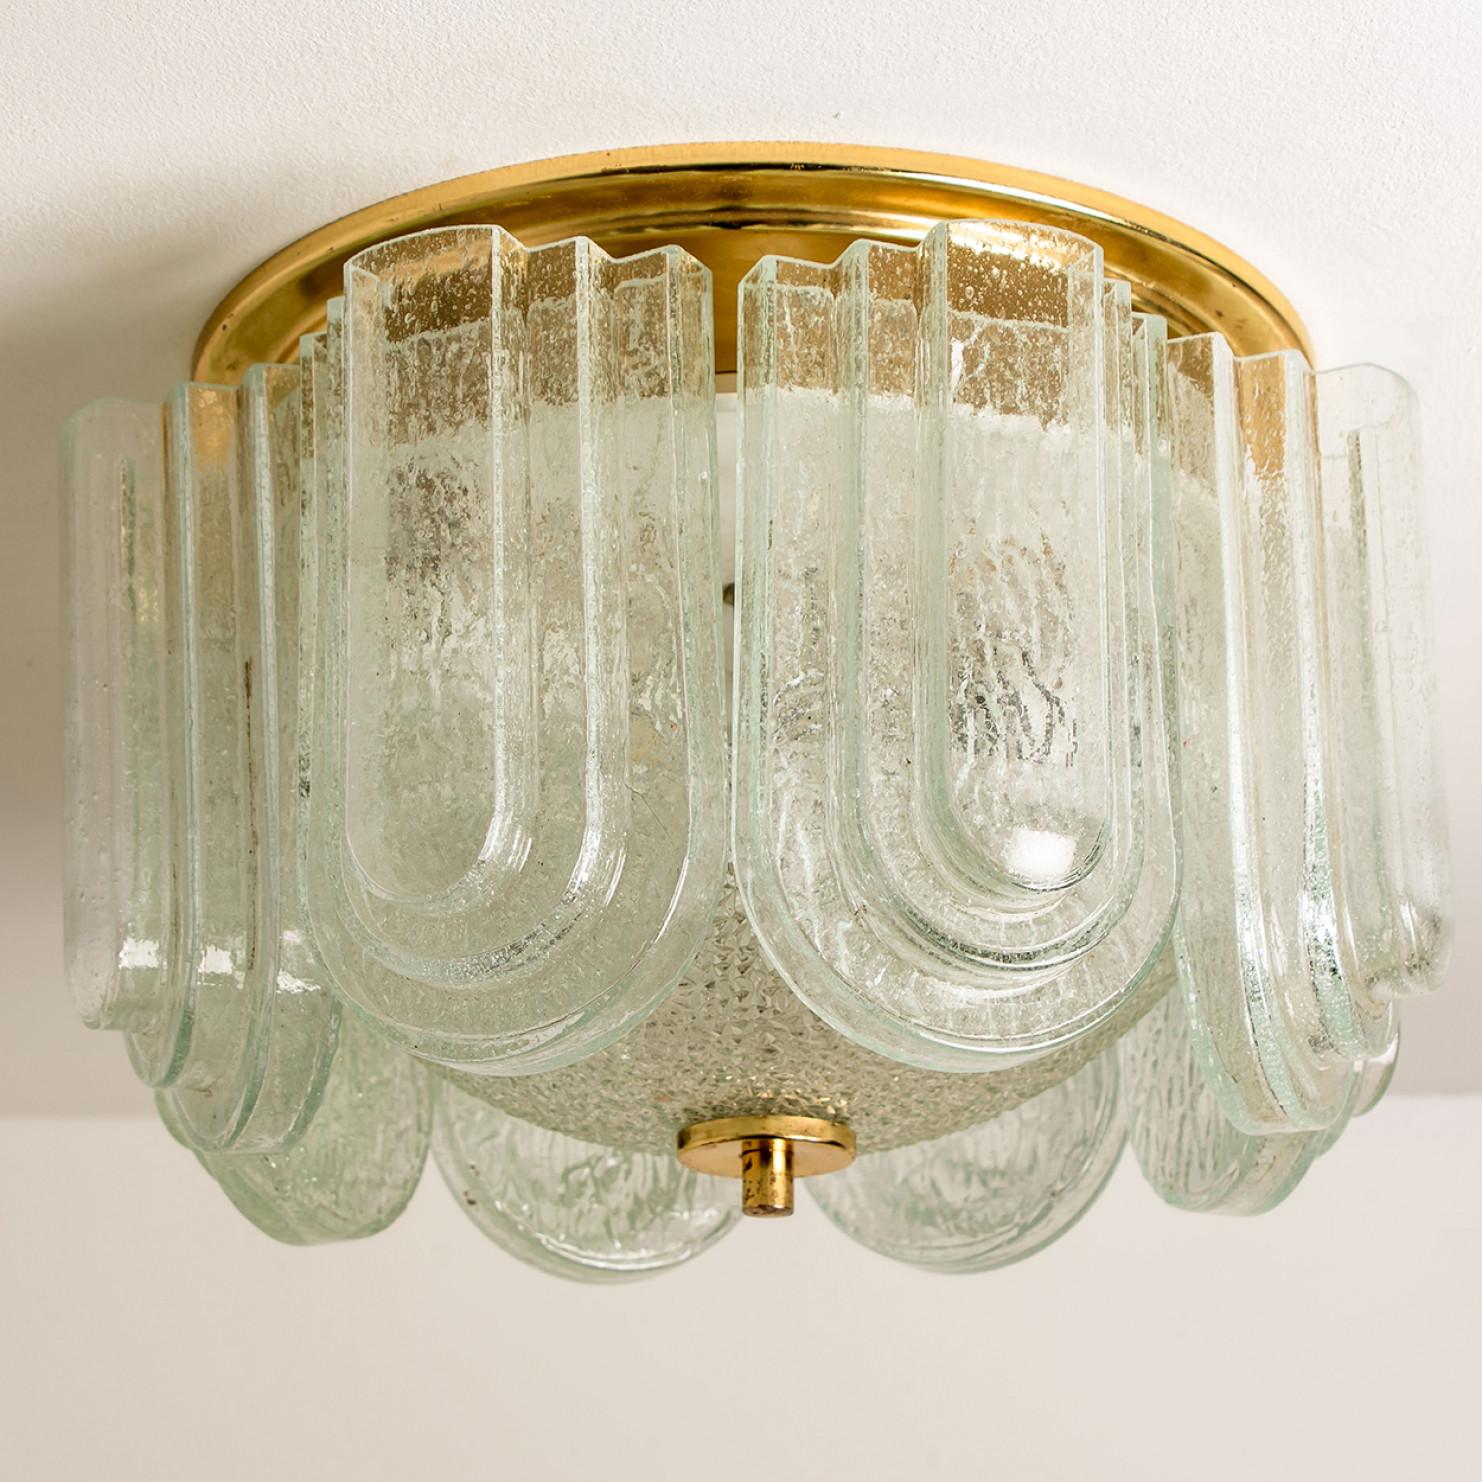 Brass and molted glass flush mount from the 1960s of the Doria Leuchten company in Germany, Europe. The lamp has beautiful stepped layers (Art Deco style) of glass construction and a brass finish. High quality piece. True craftsmanship of the 20th